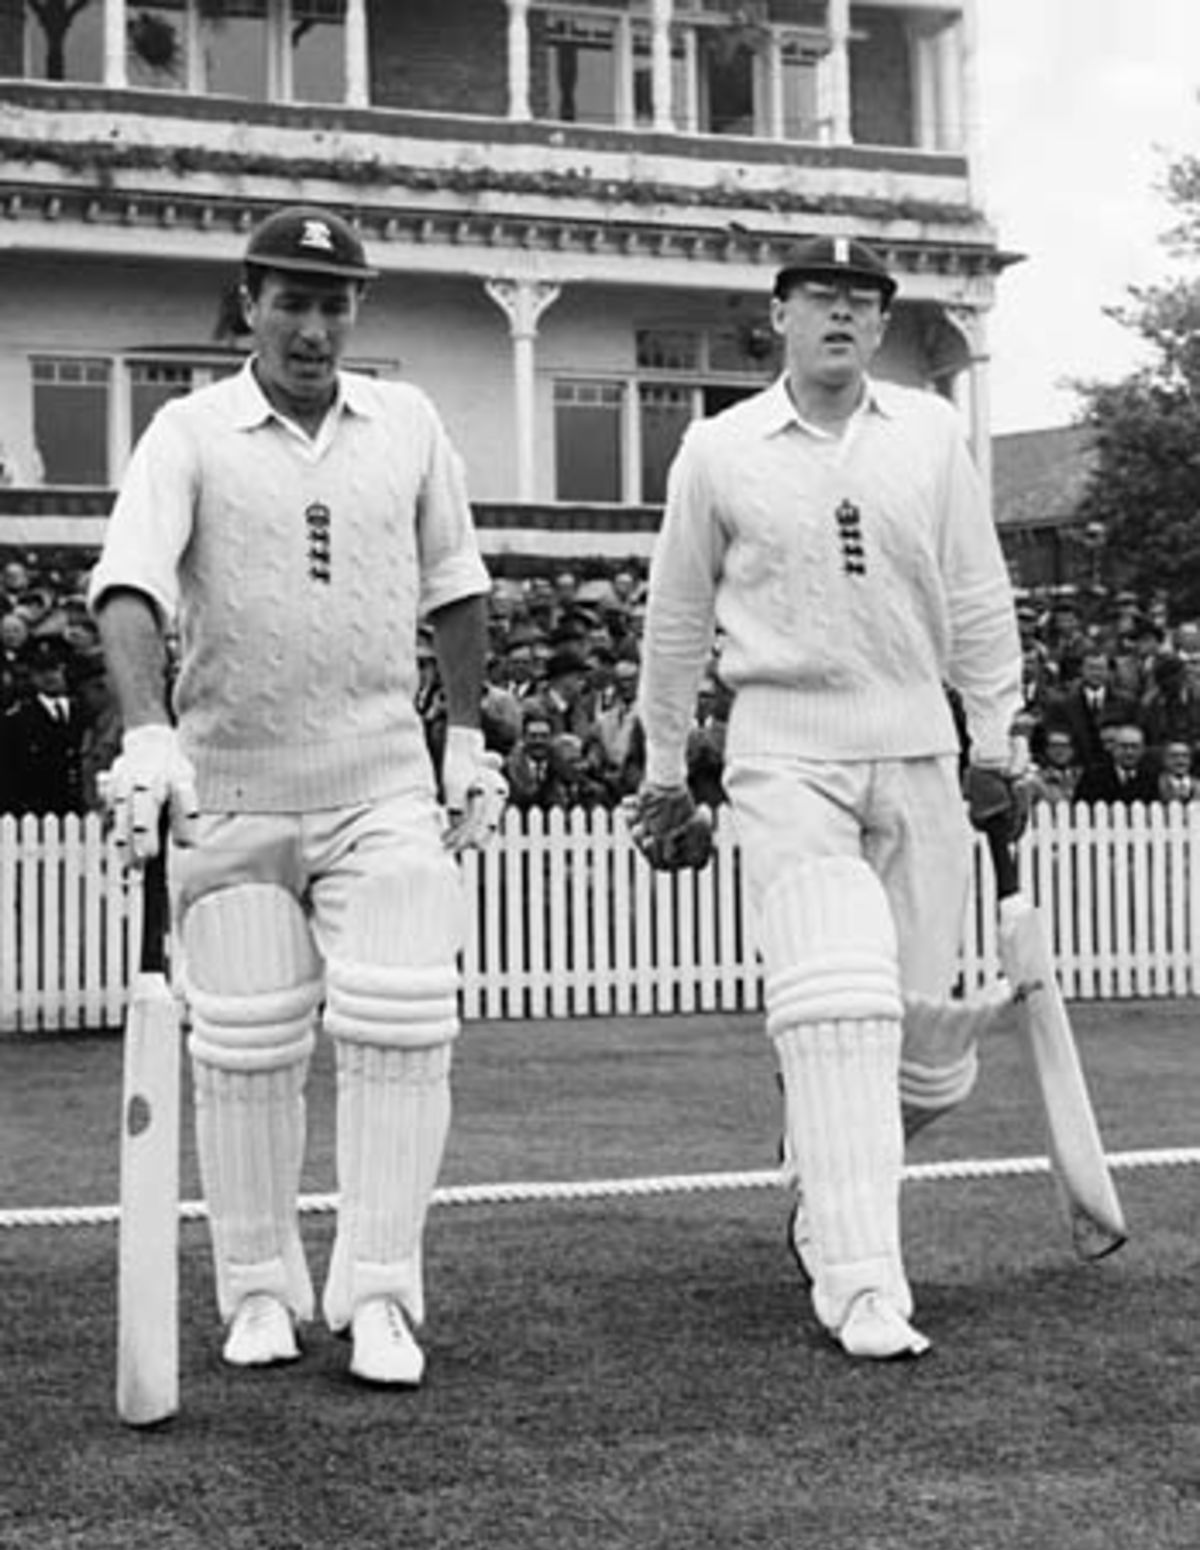 Geoff Boycott walks out to open with Fred Titmus, England v Australia, Nottingham, June 5 1964